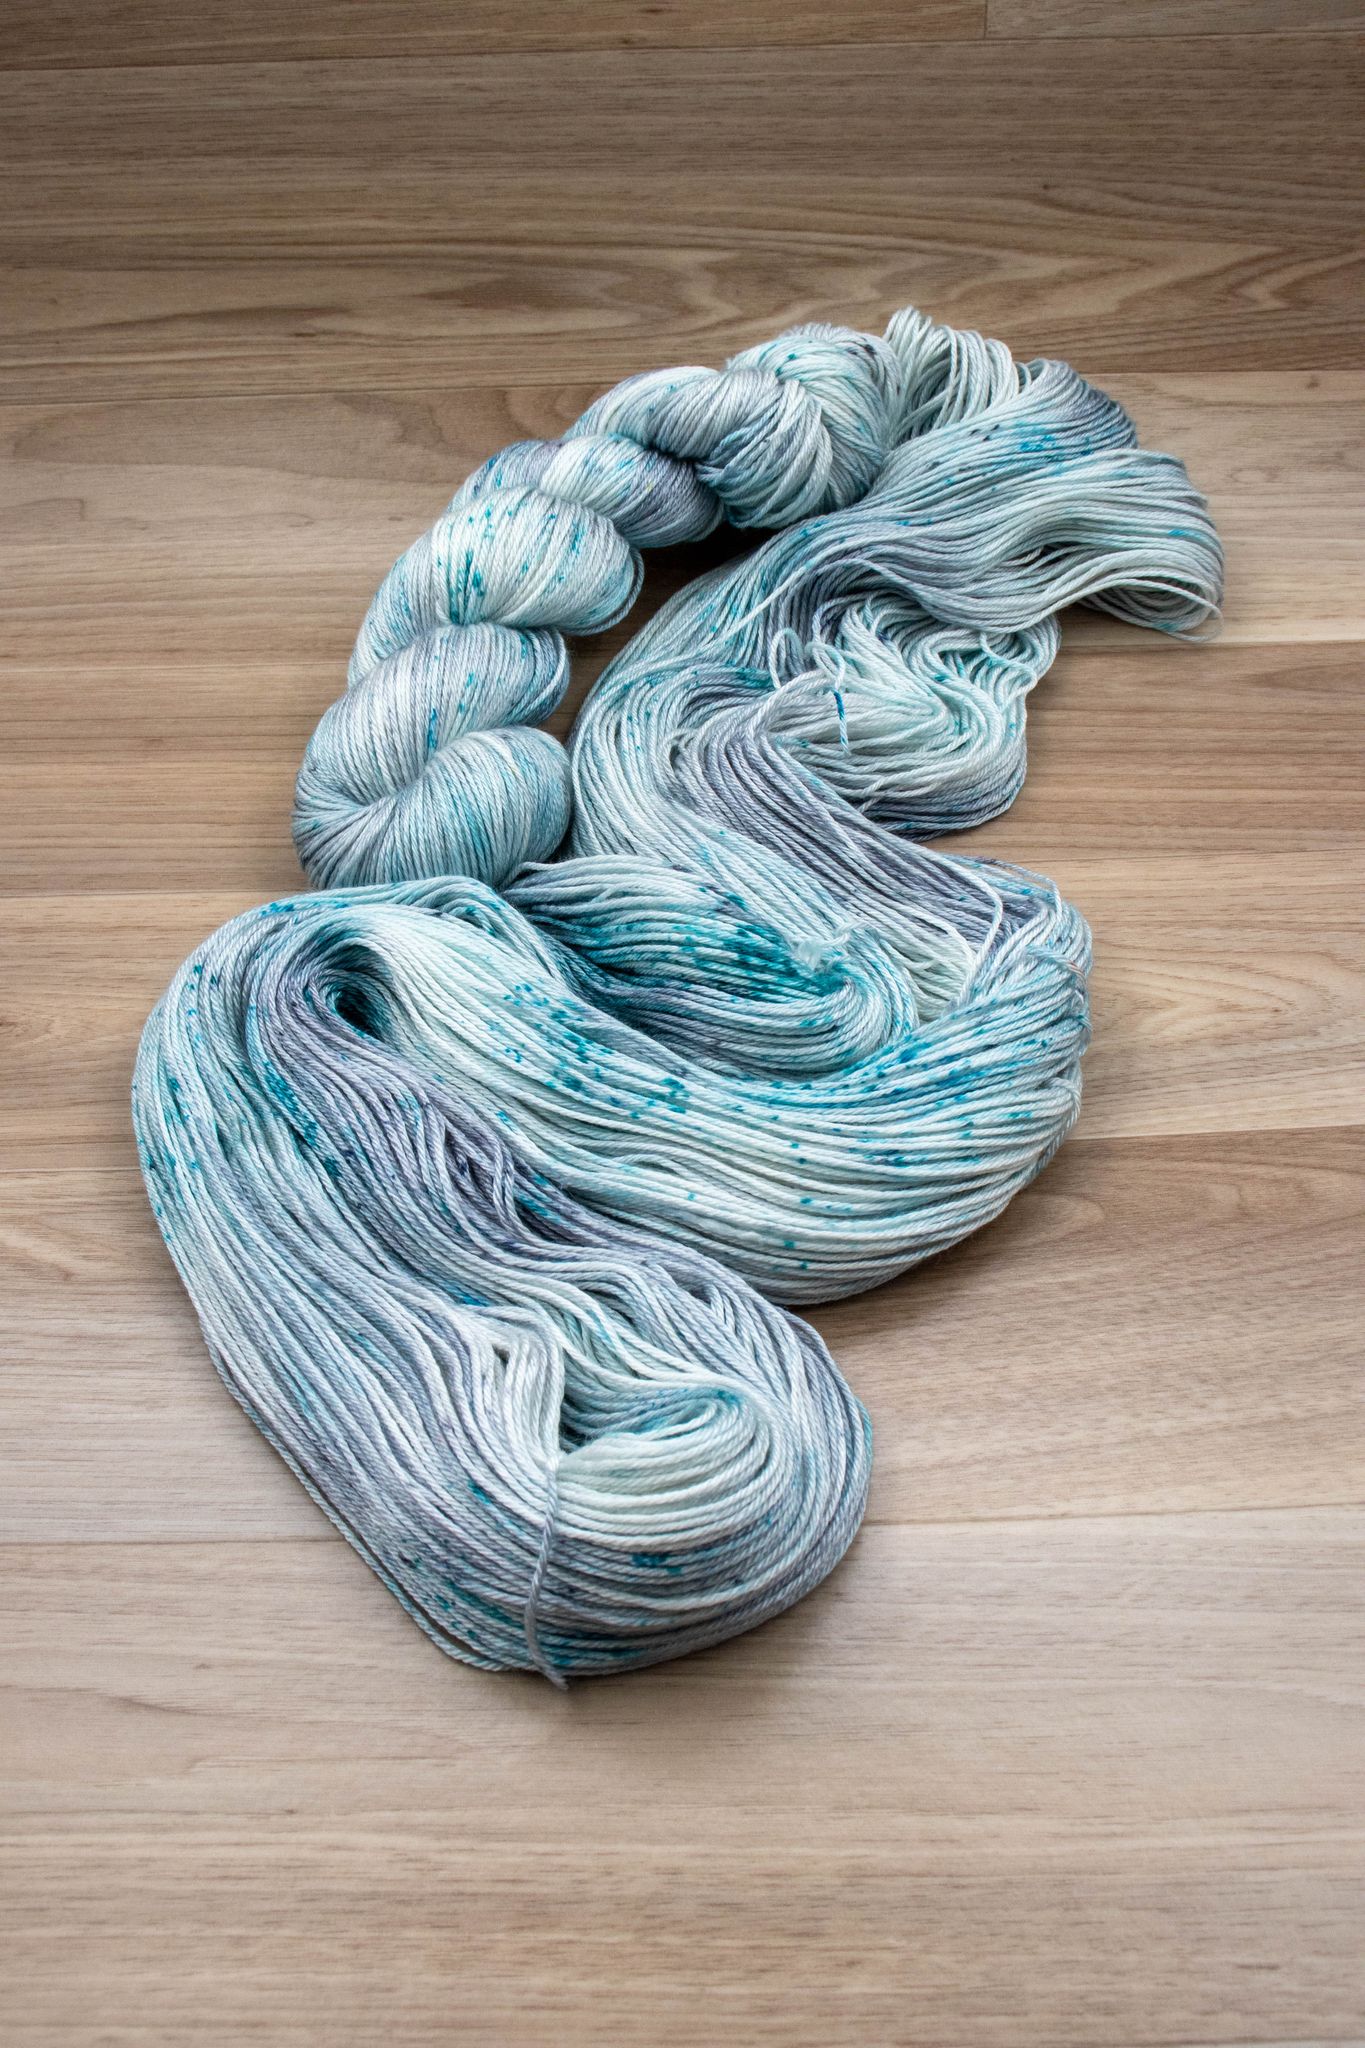 Trader of the Month - Obsession Yarns